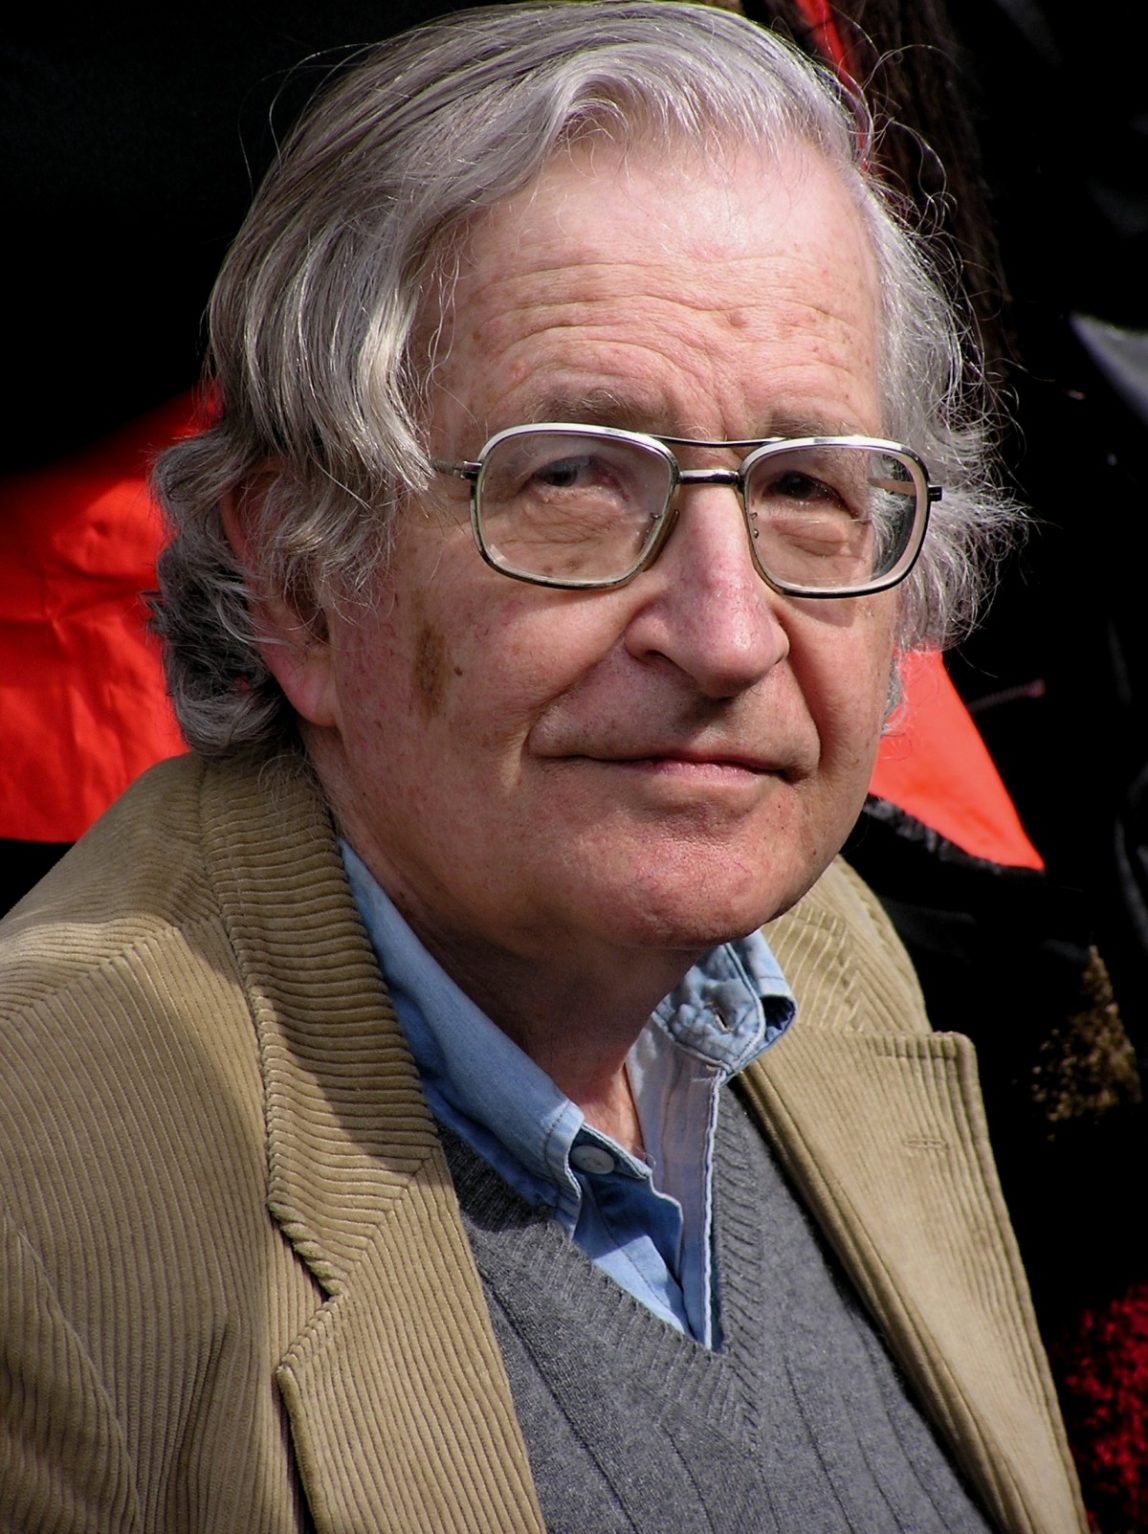 Noam Chomsky: Bernie Sanders Supporters are a “Mobilized Force That Could Change the Country”